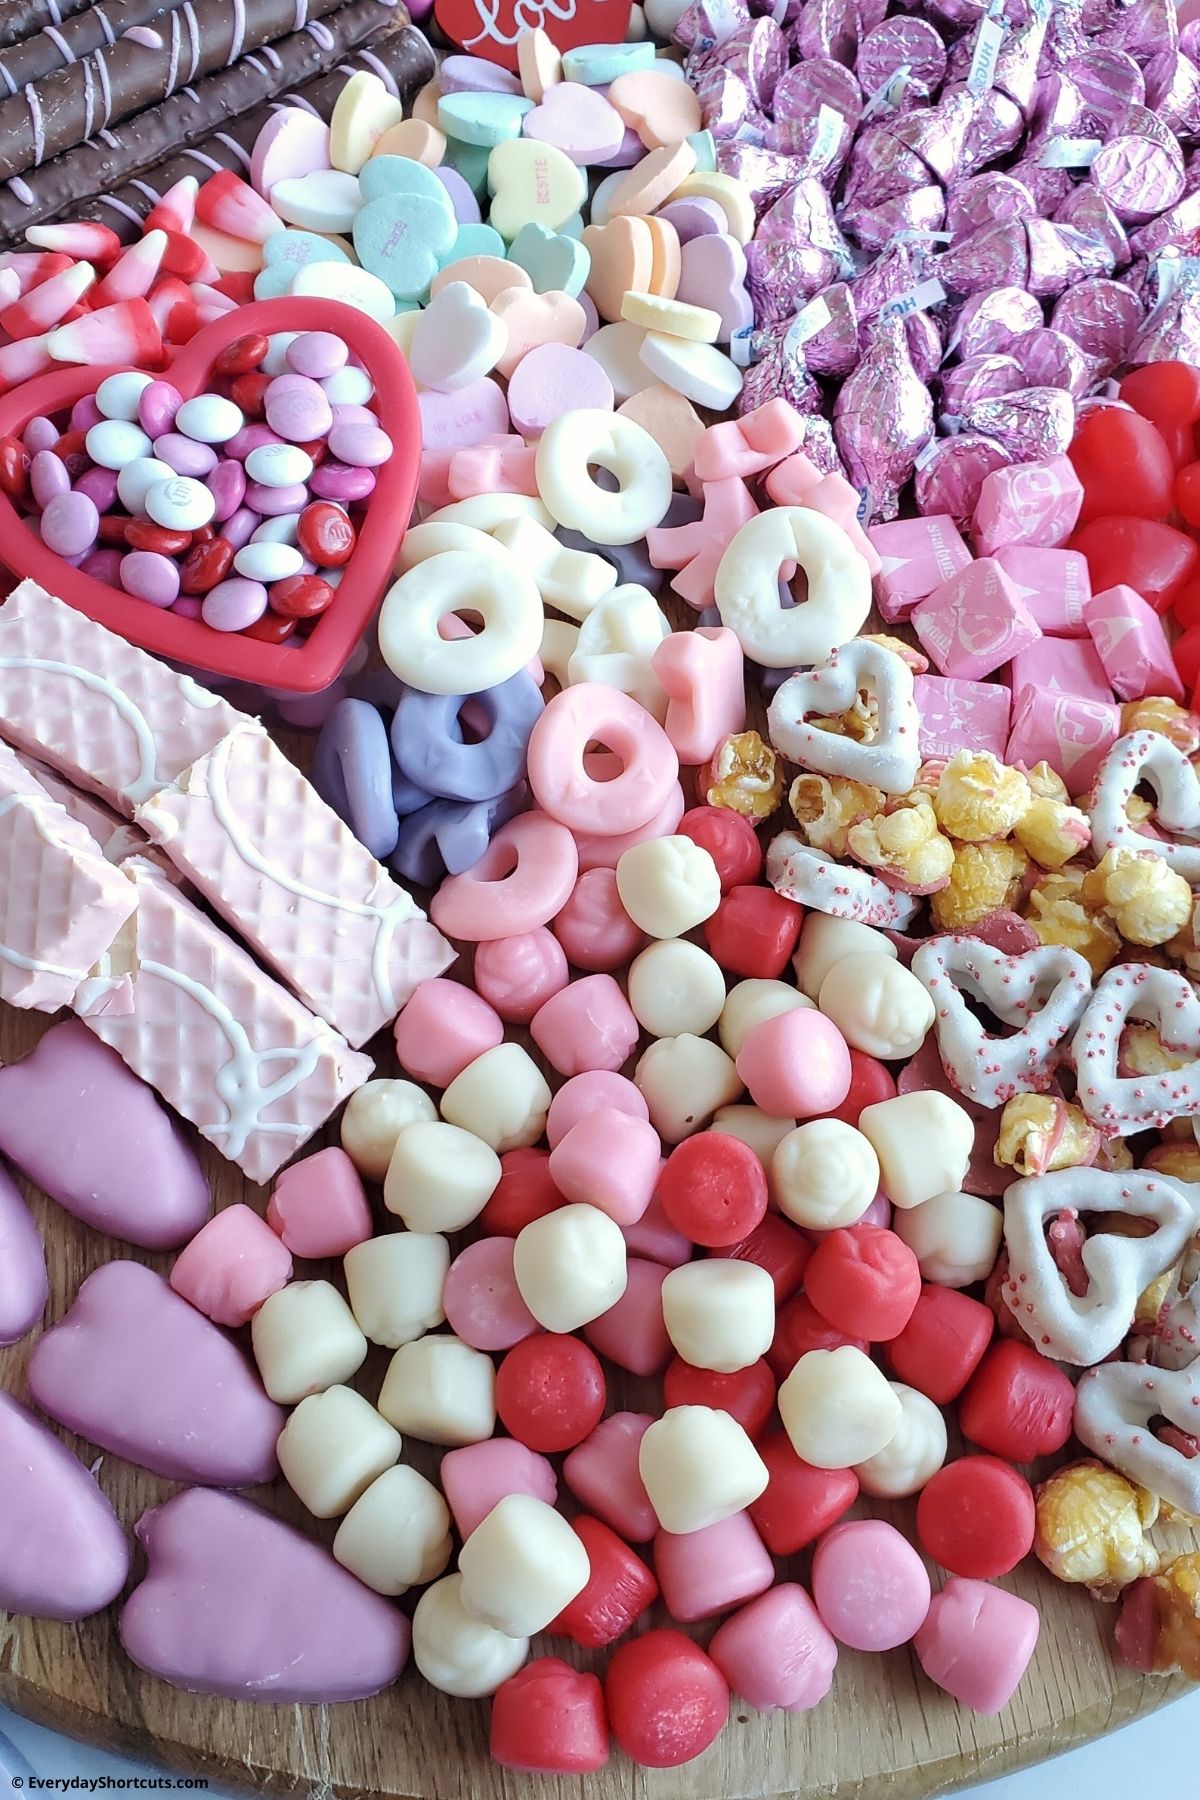 pink candies on candy board